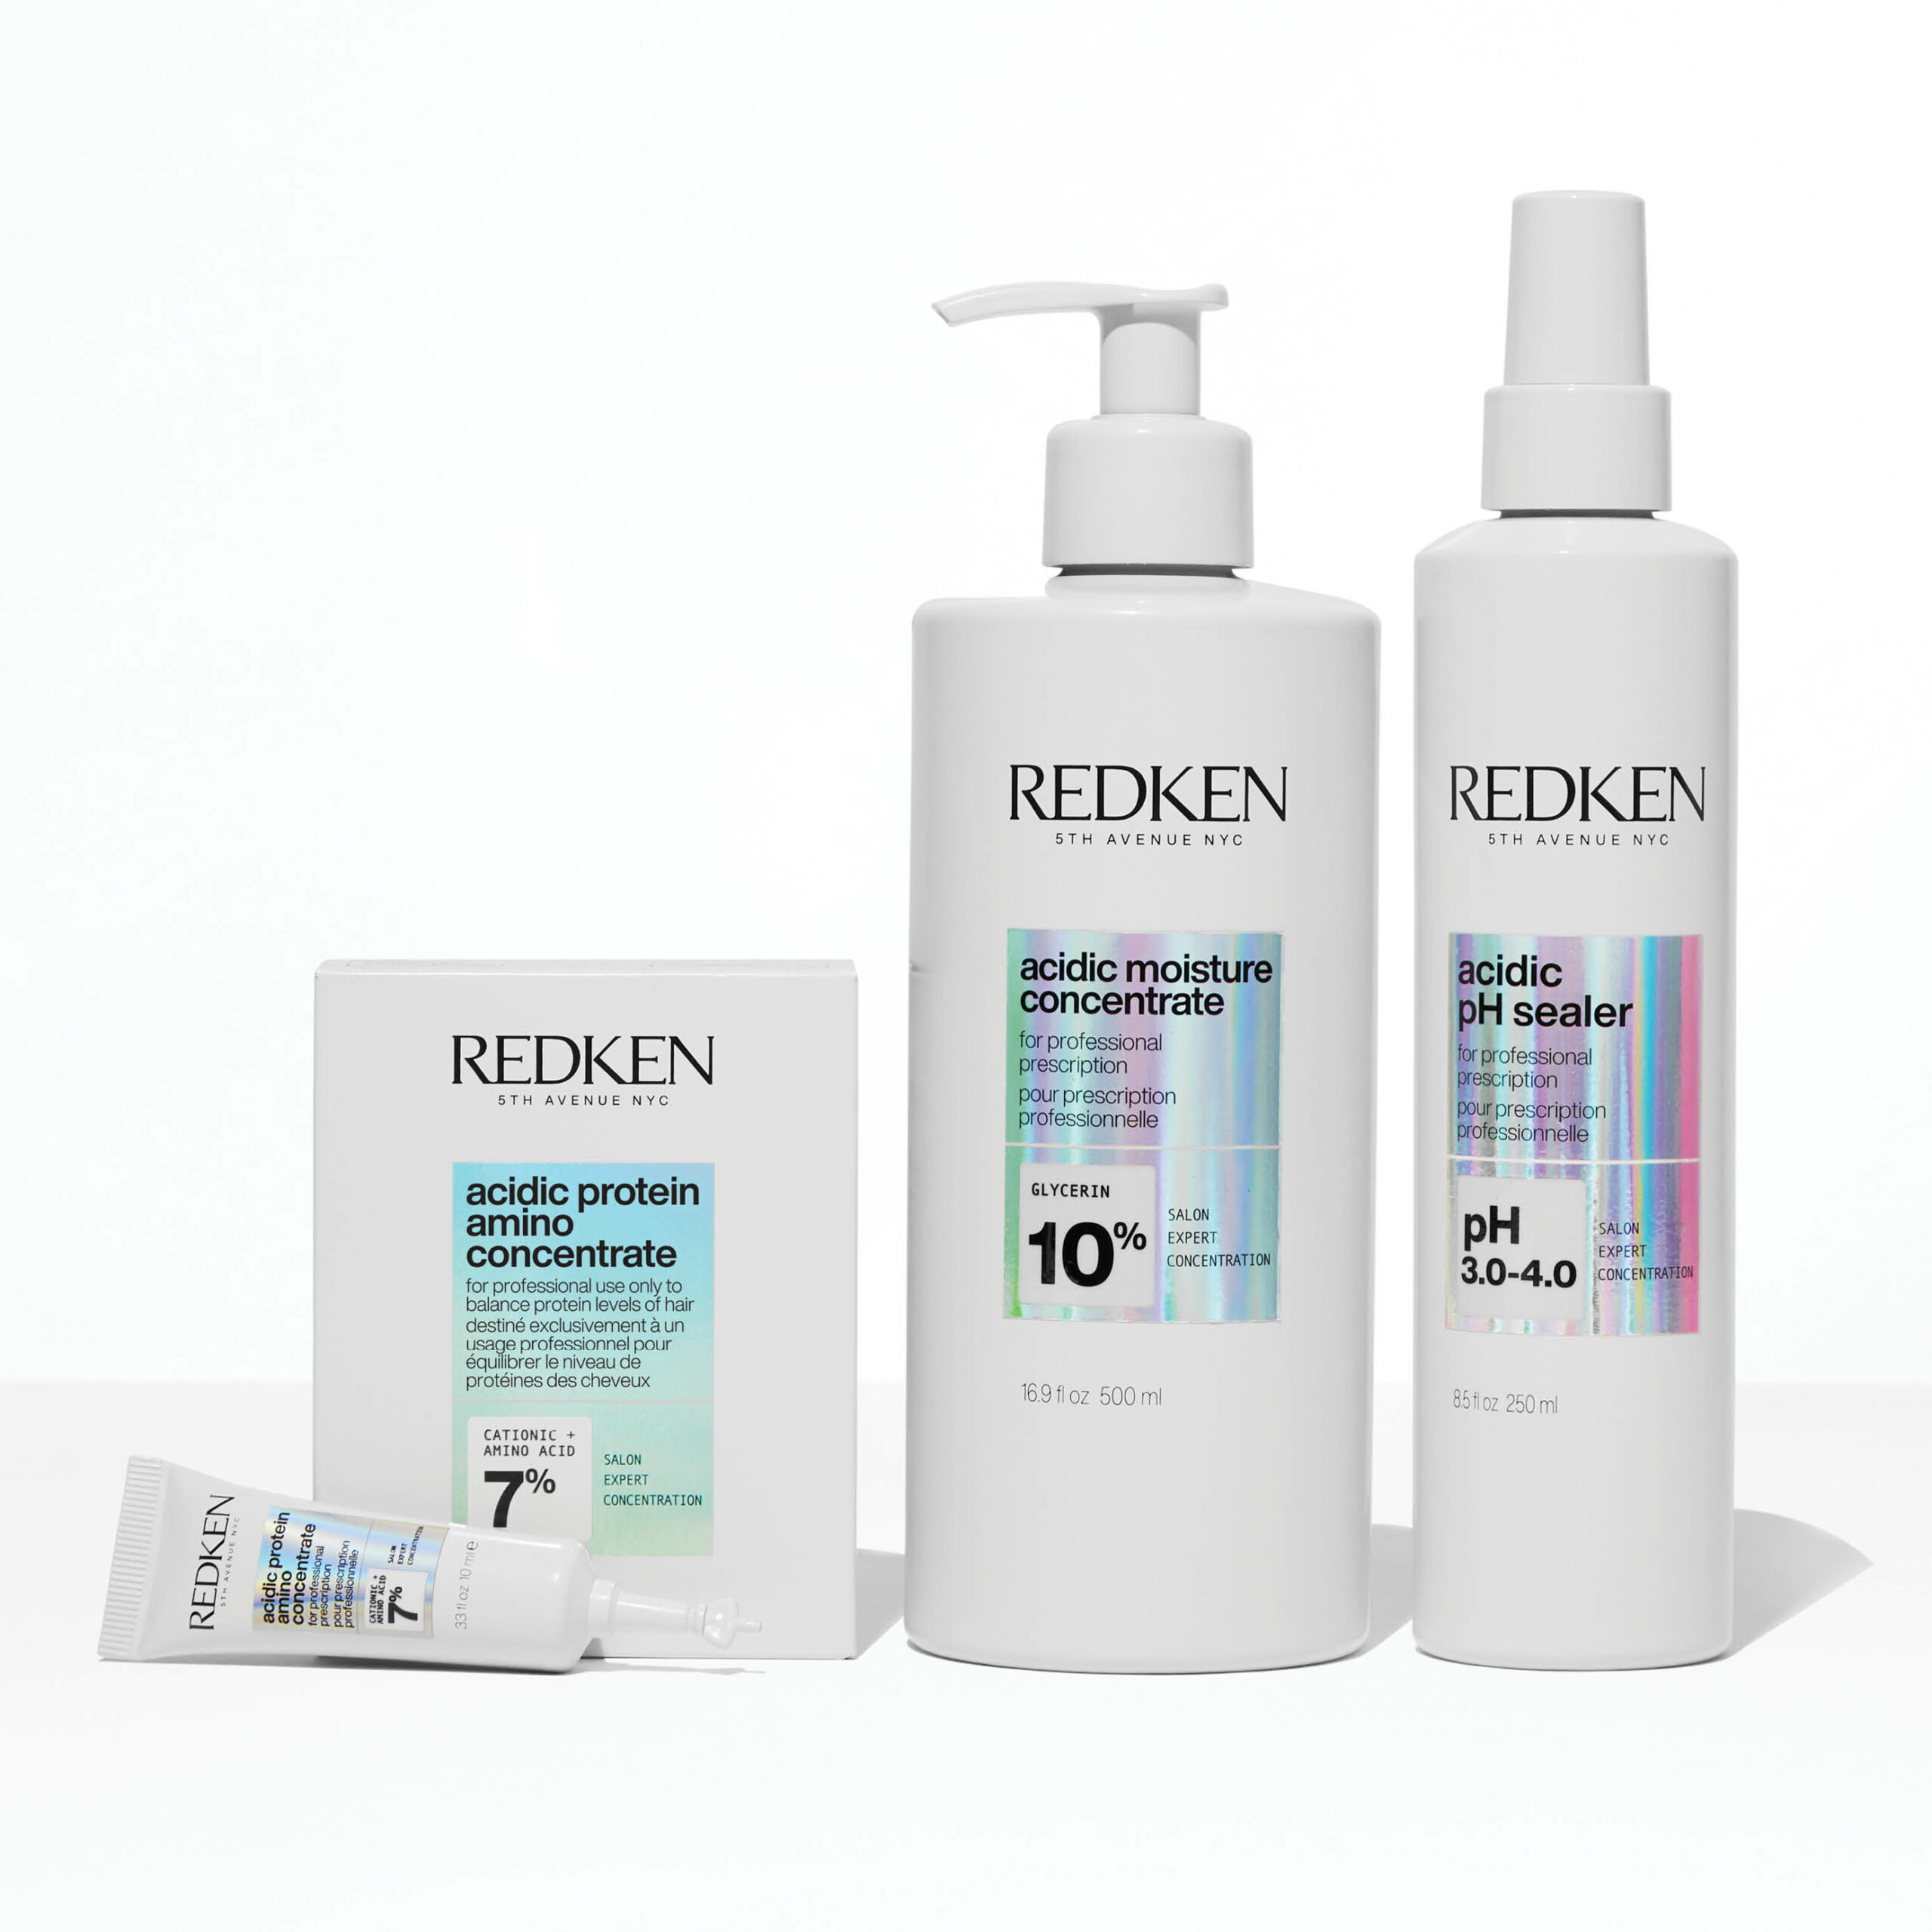 Redken's new Acidic Concentrate Hair Care System is available from Salons Direct